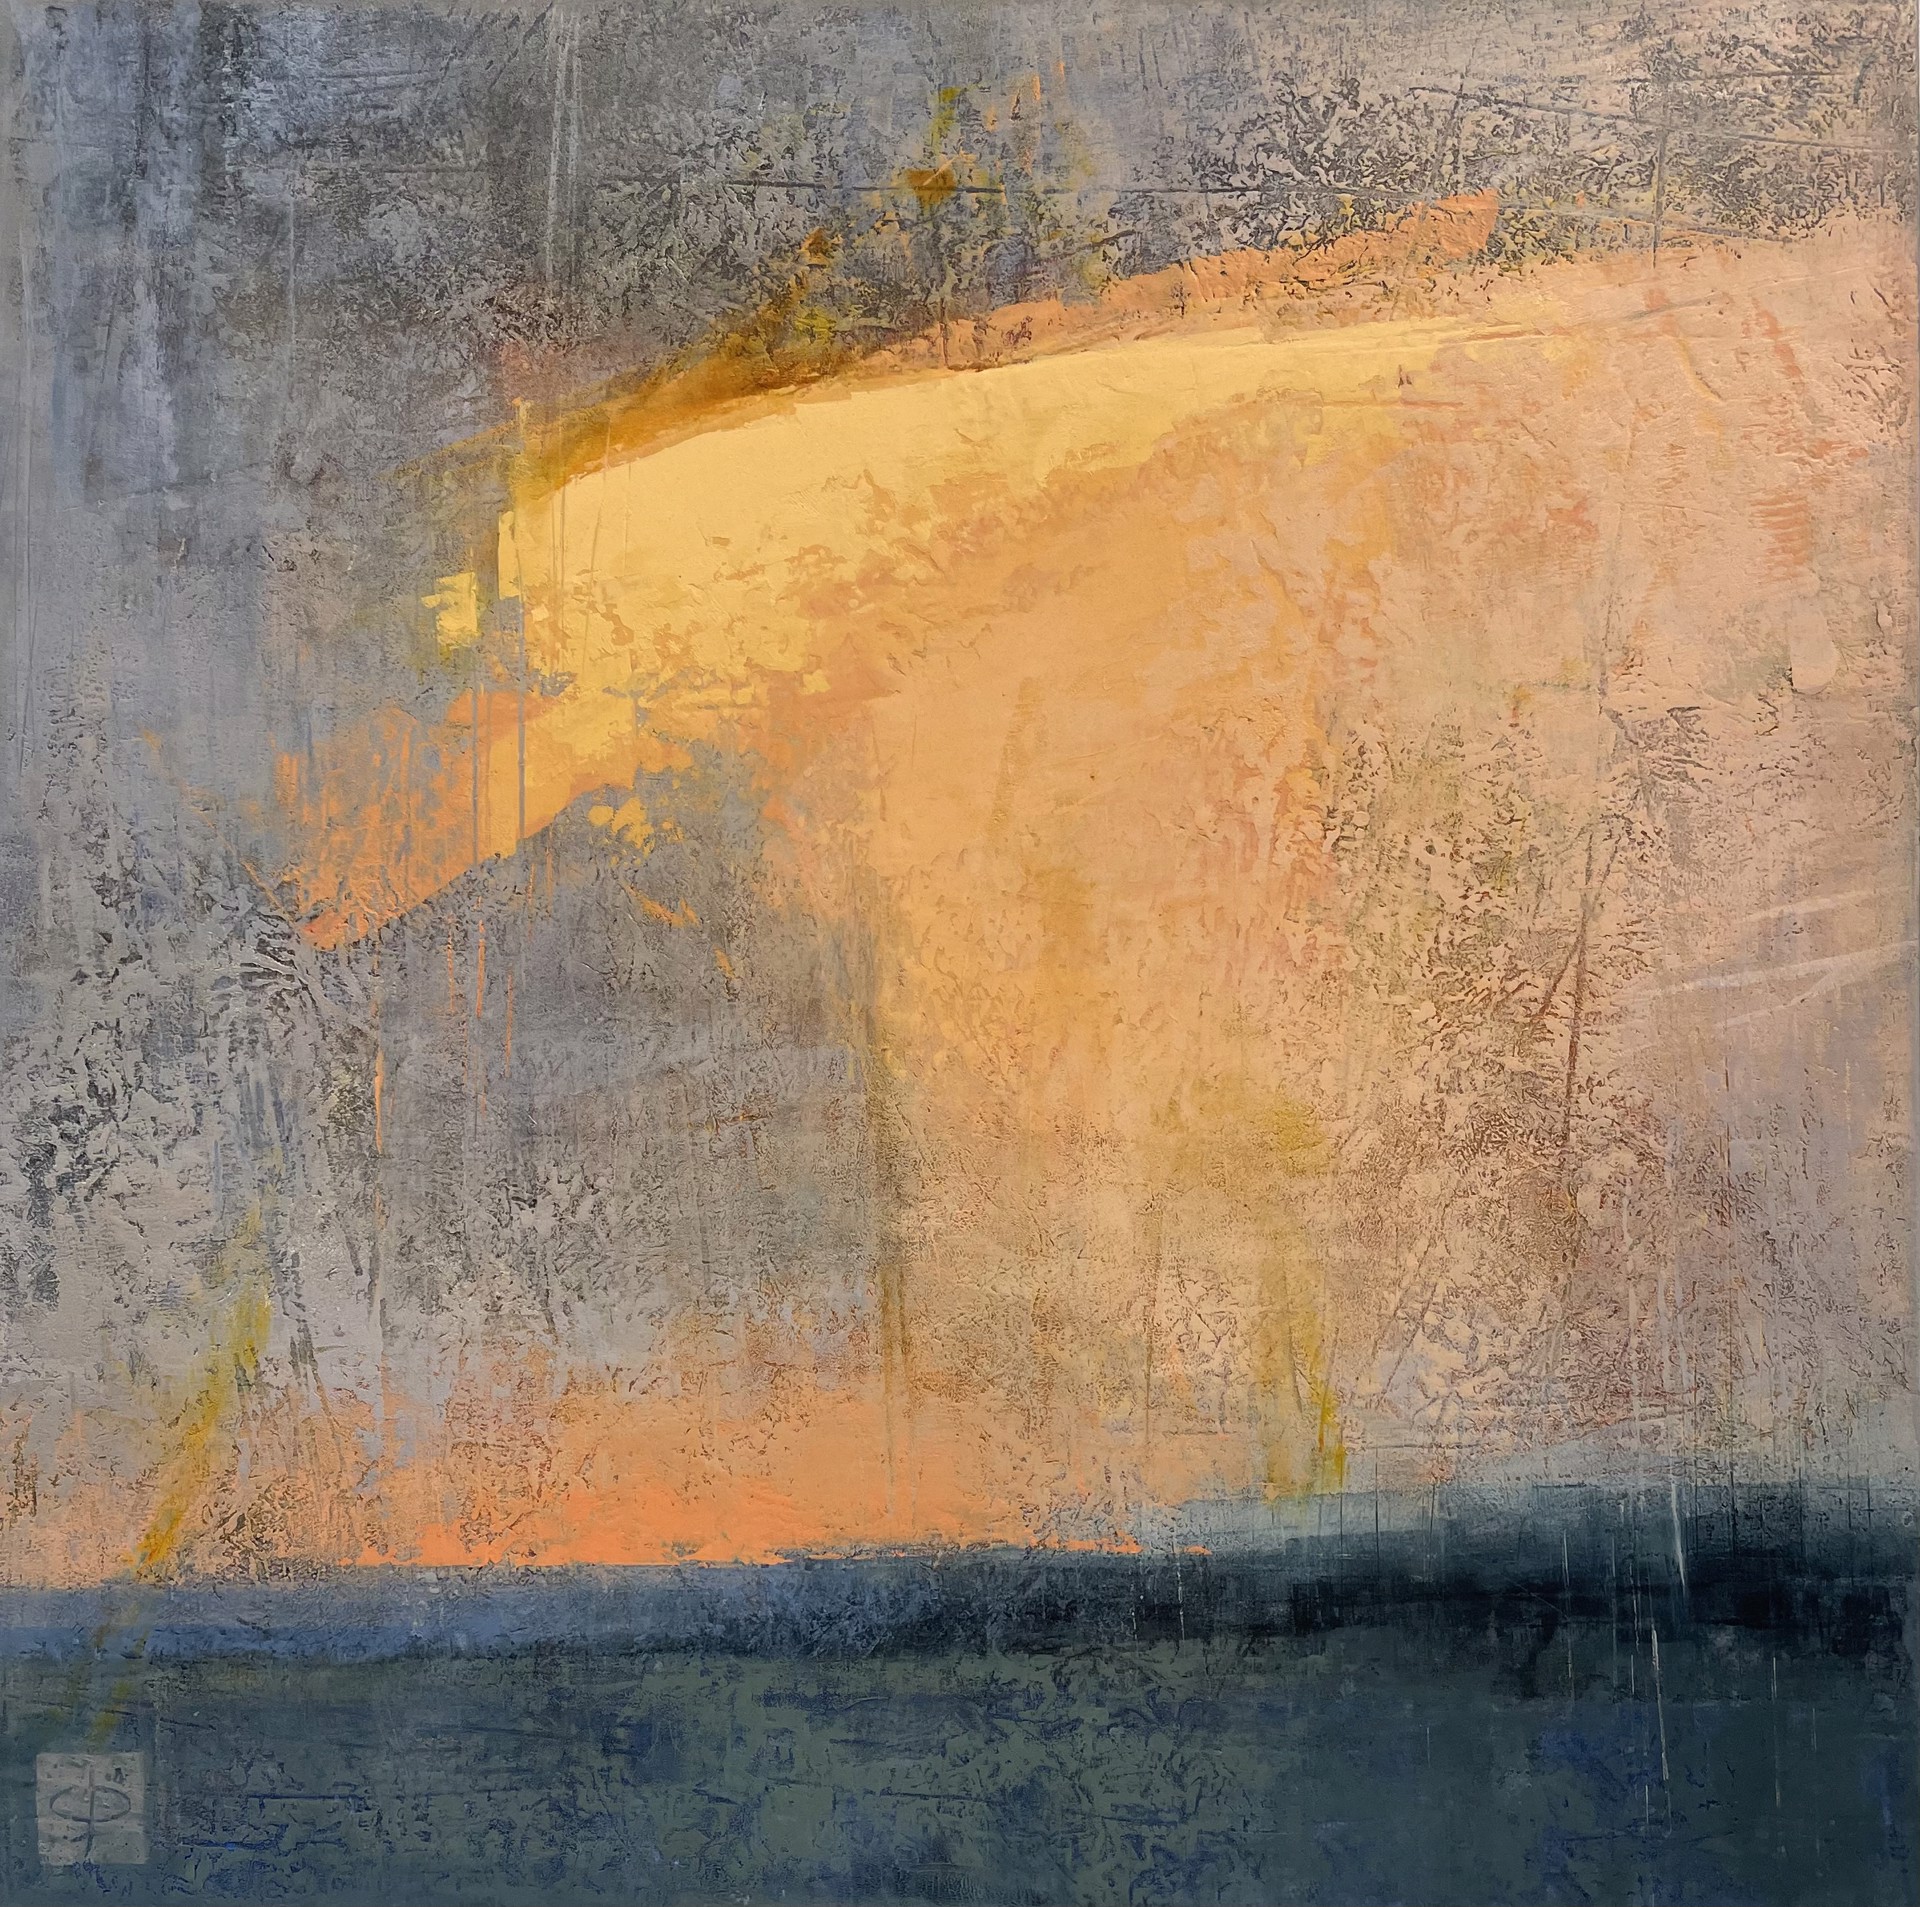 abstracted landscape painting, oil and cold wax painting, blue and gold landscape, sunset or sunrise painting, square painting 